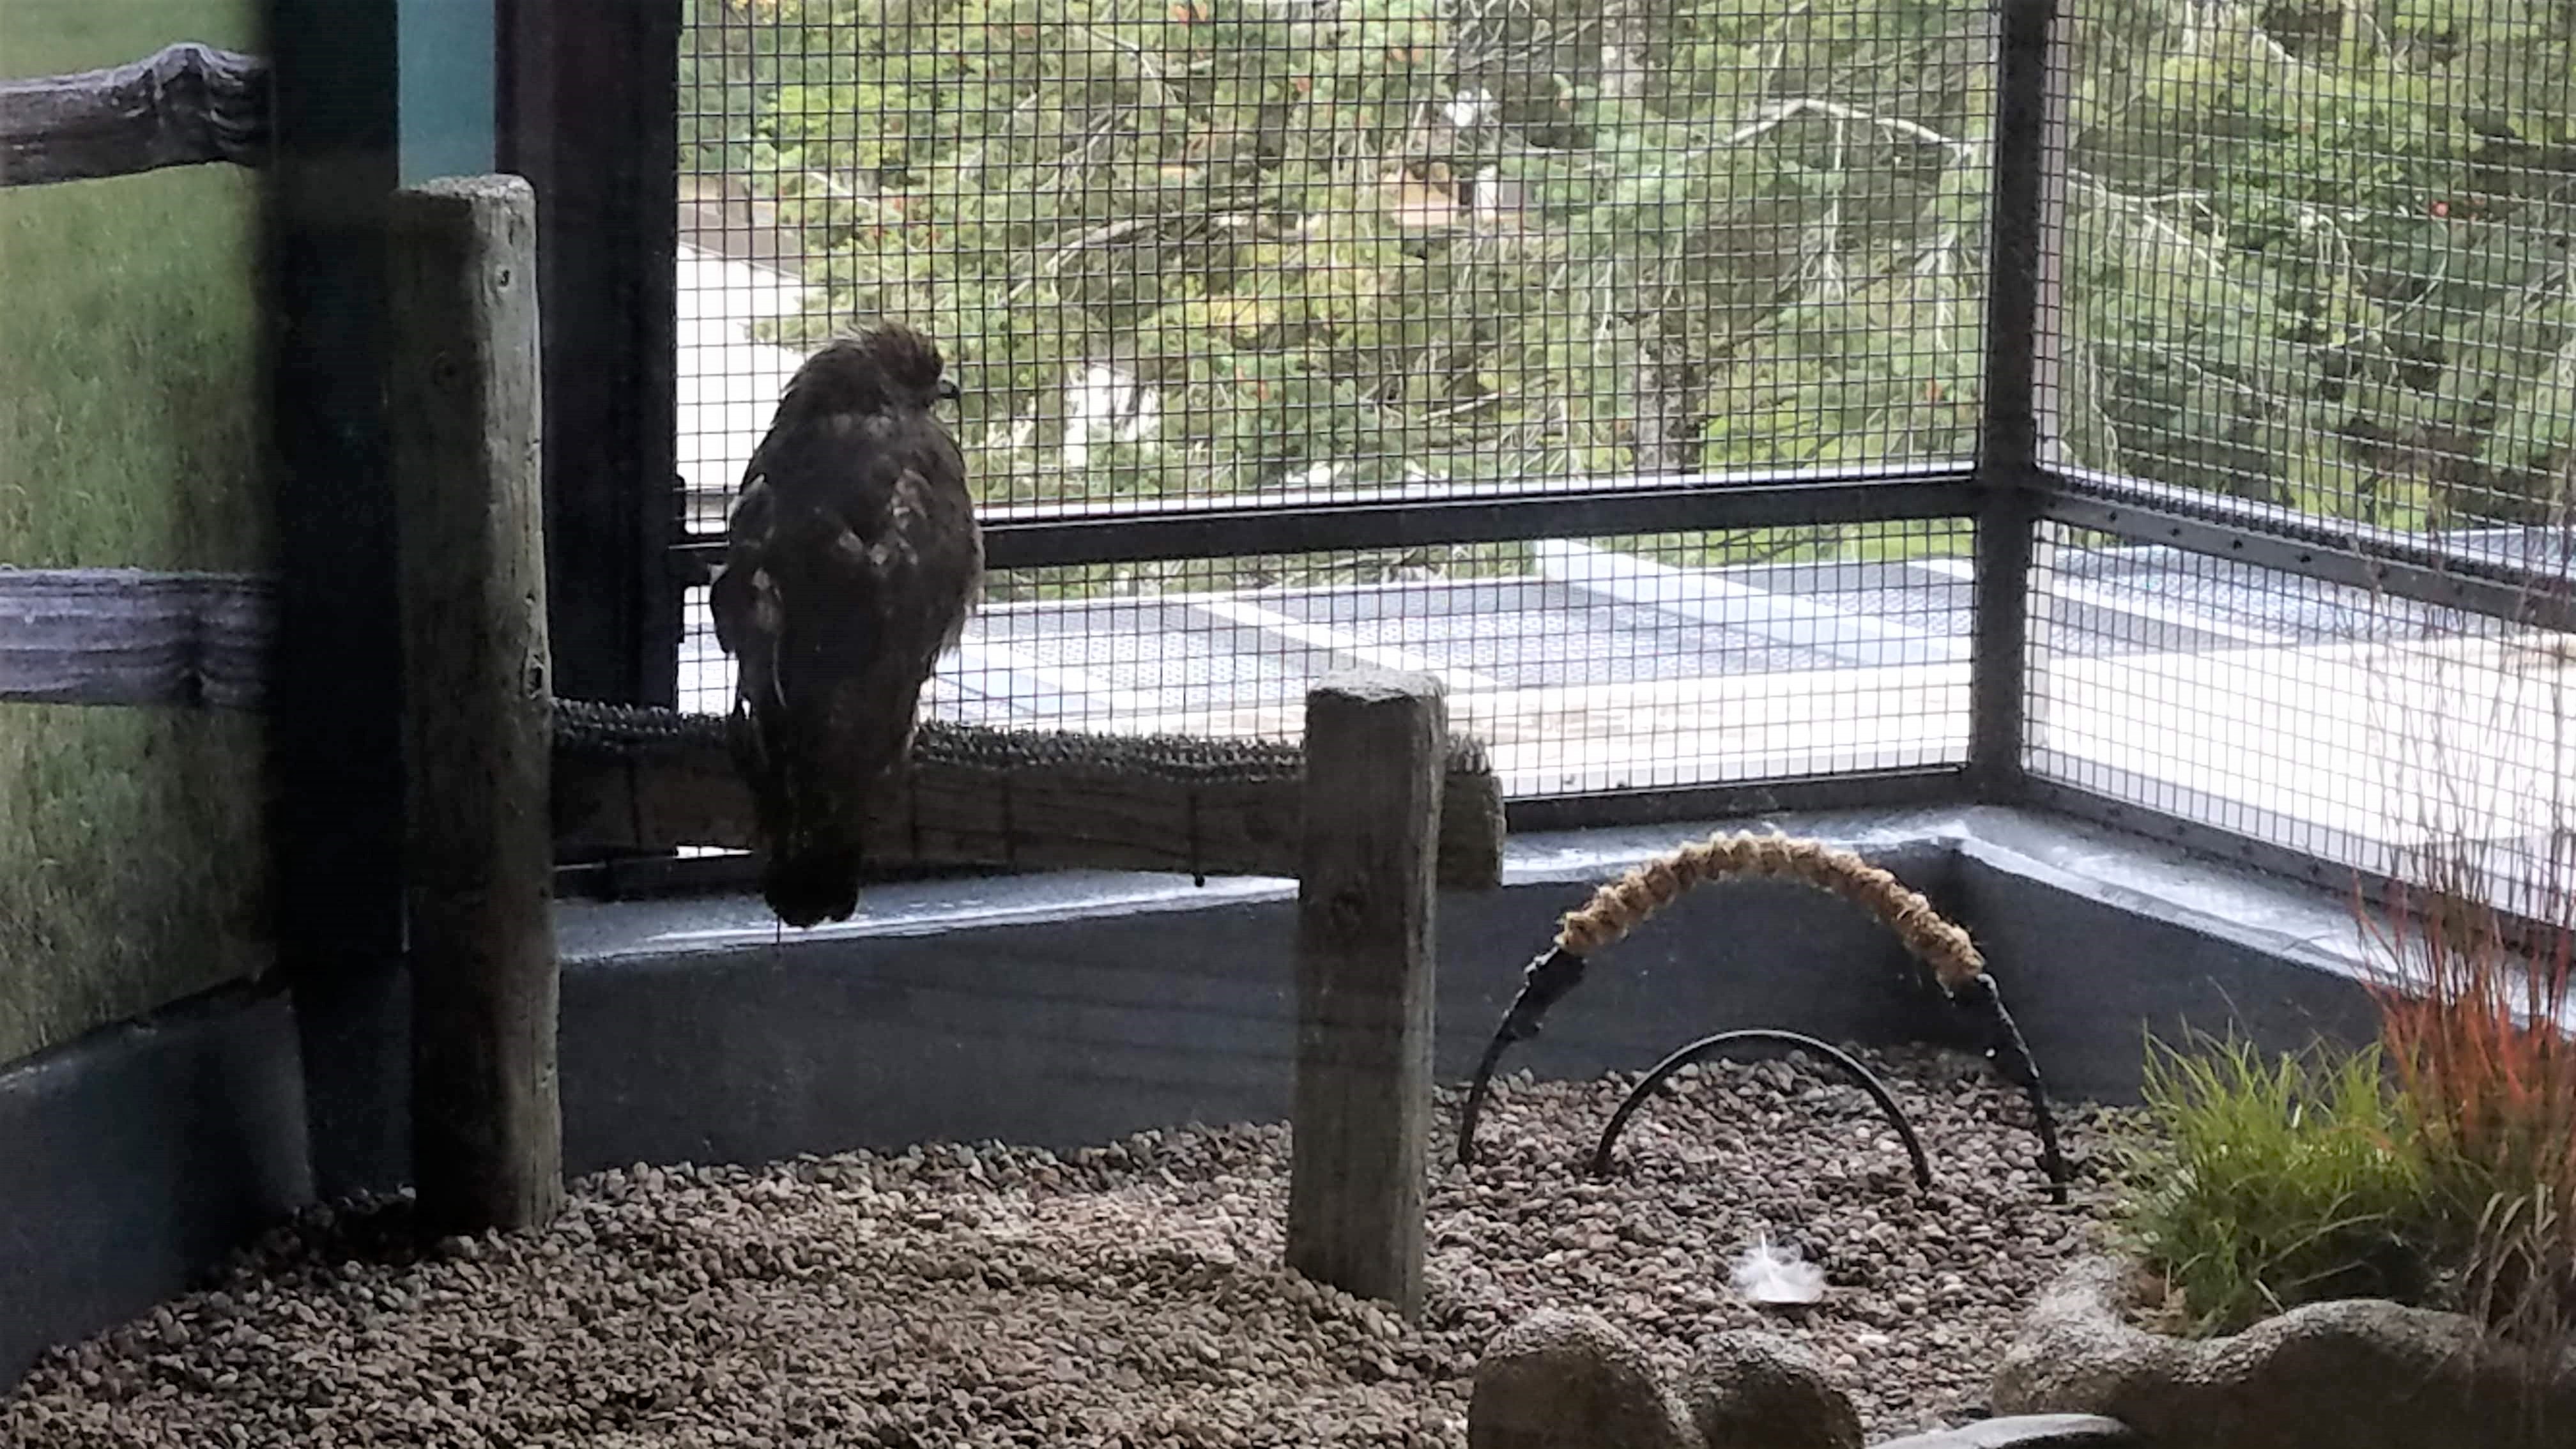 Red-tailed hawk in an enclosure